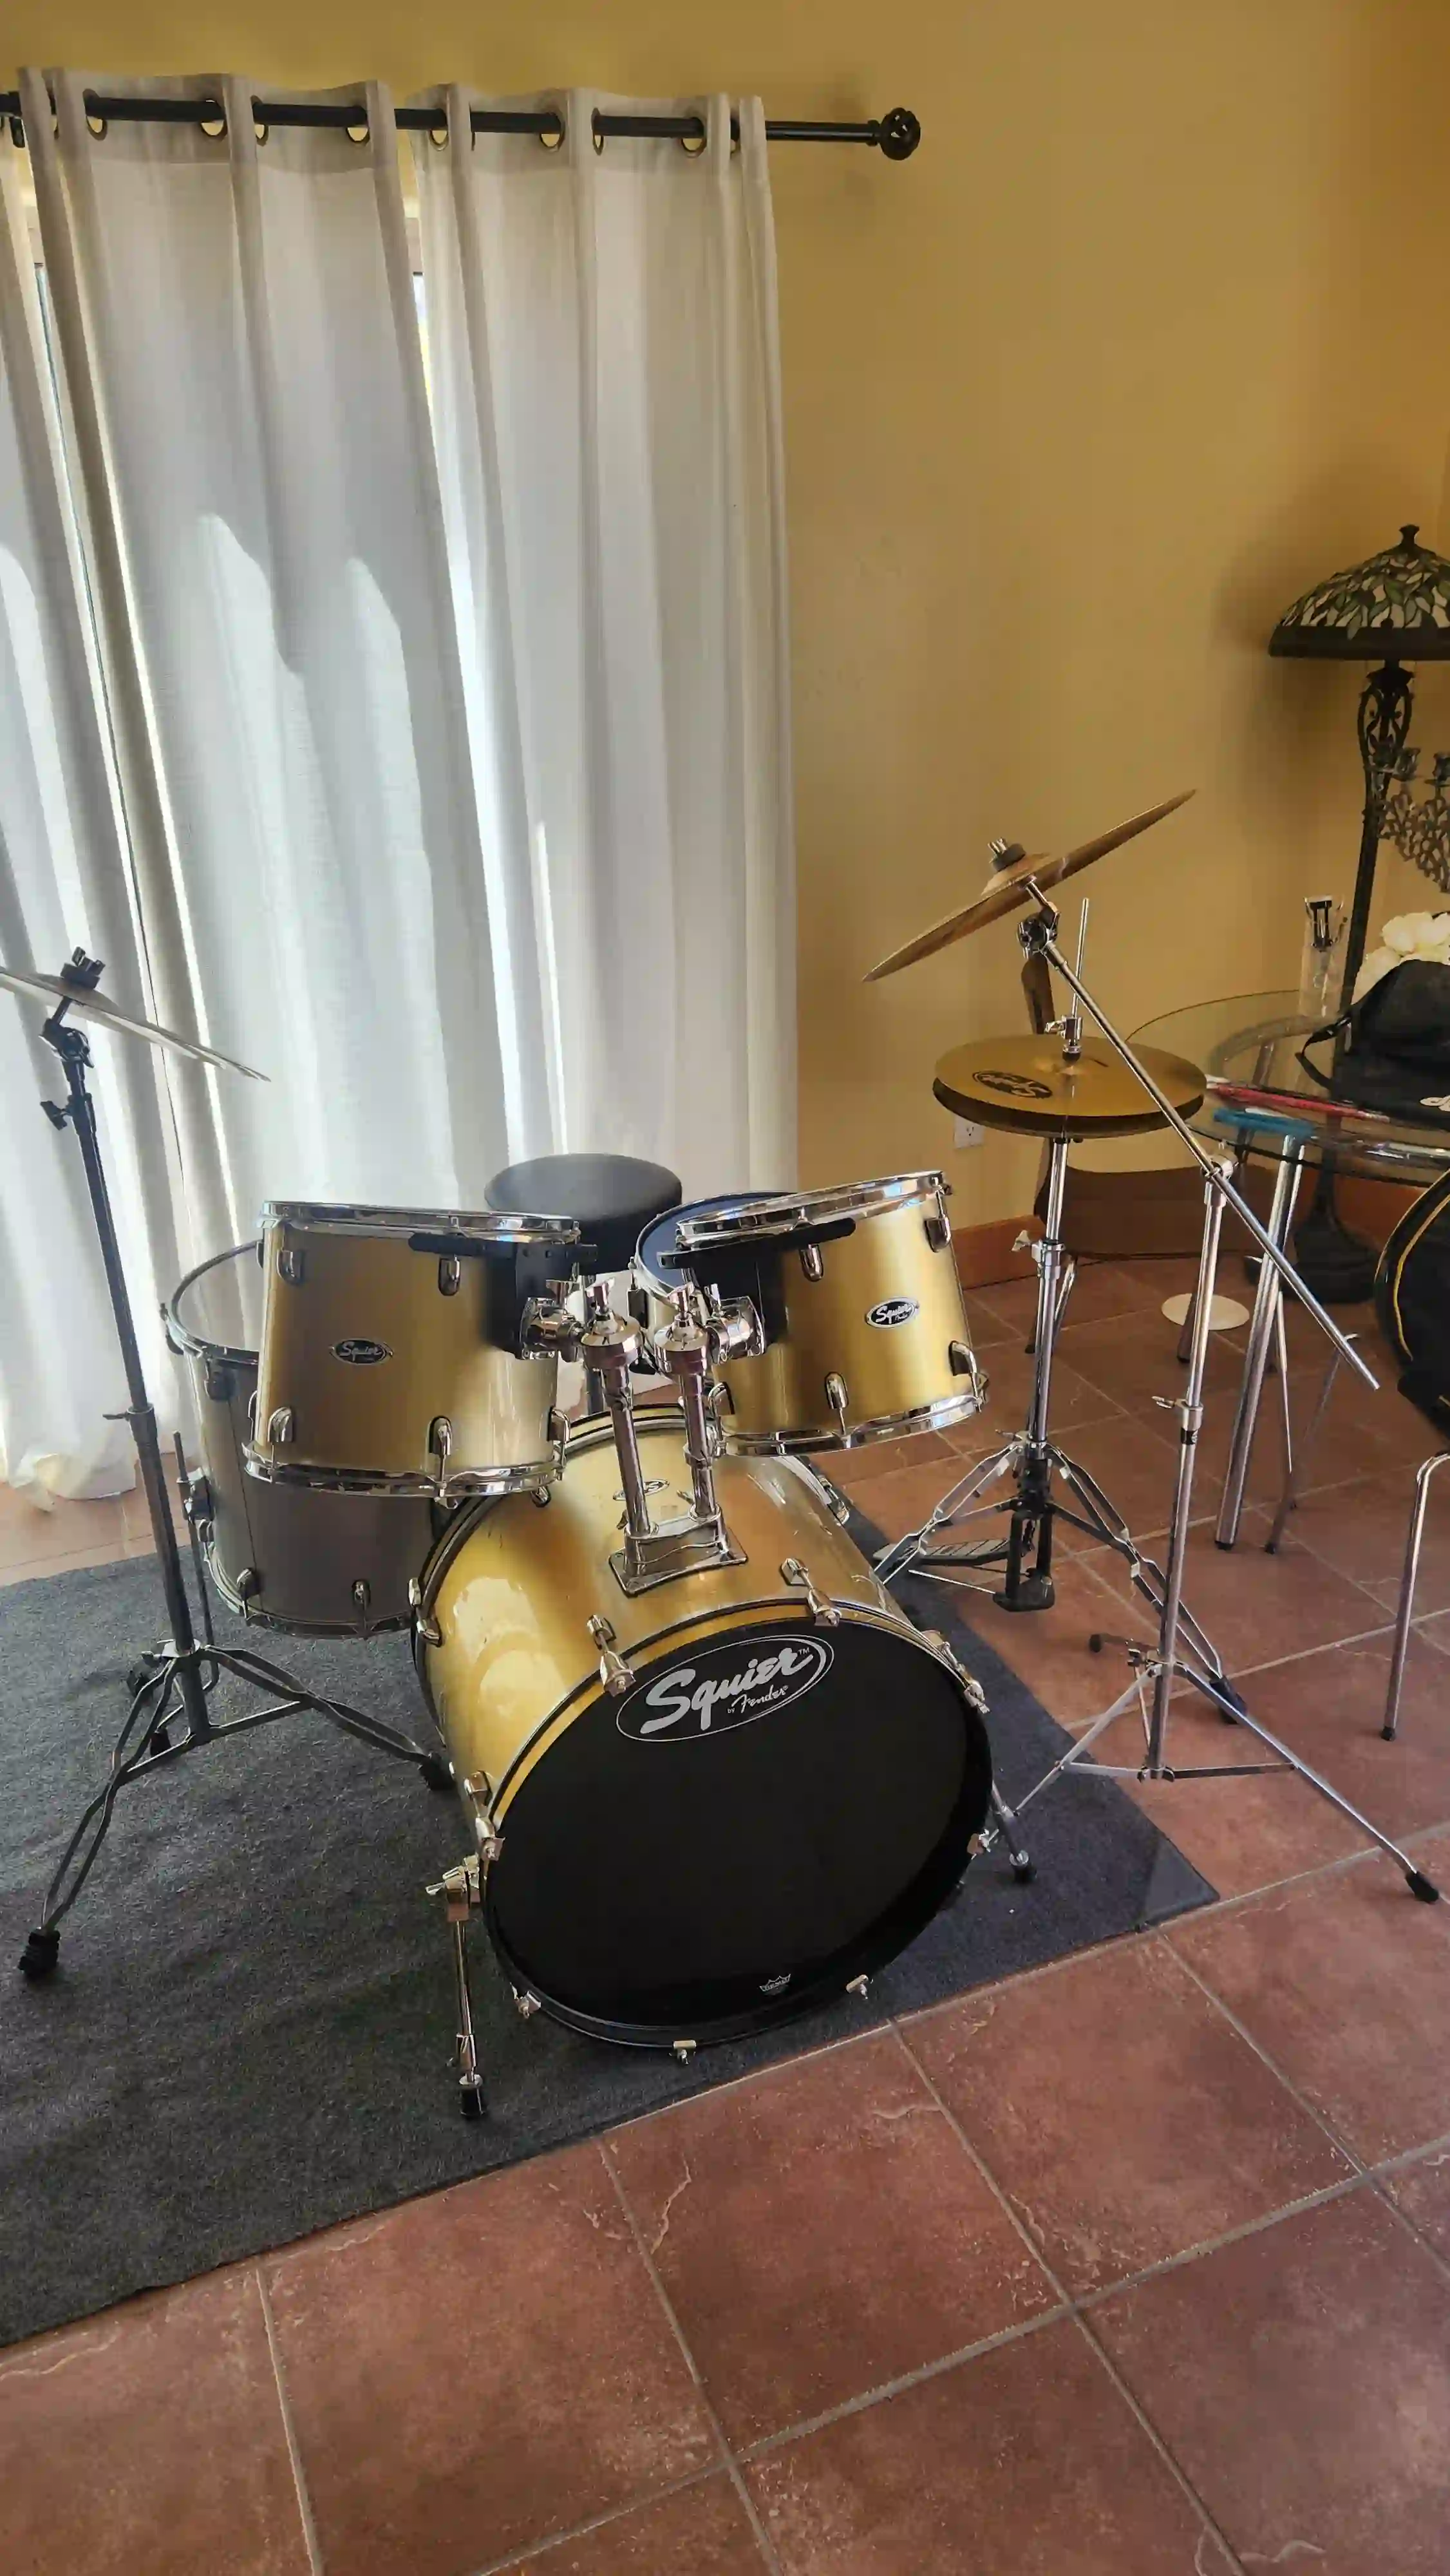 Drum set donated by Tim McFarland